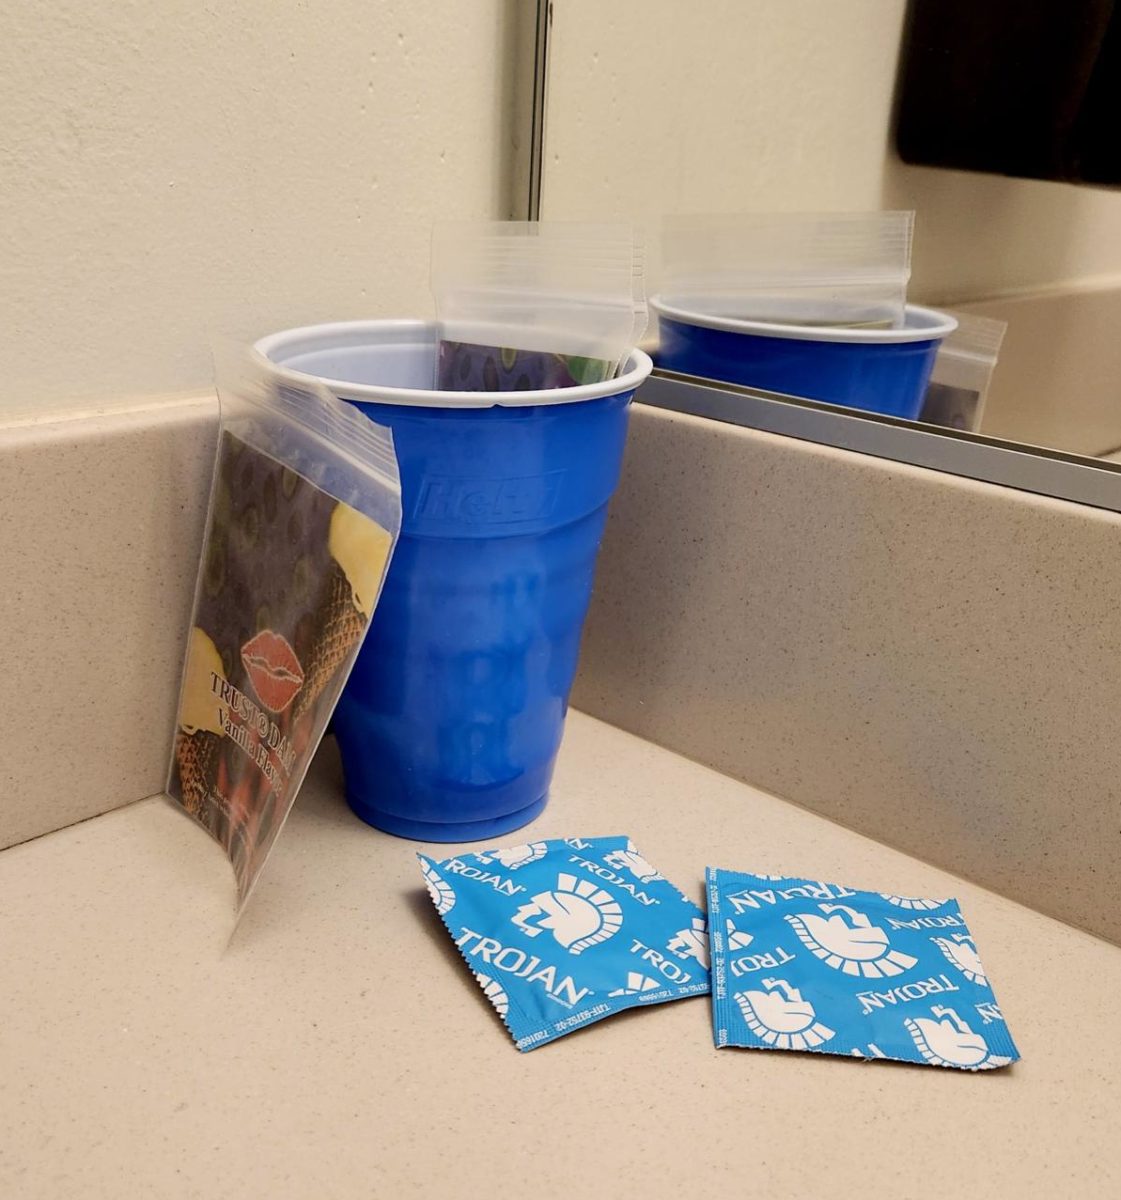 Jan Kaufman’s office gives condoms and lube to resident advisors, who can then distribute the products to their residents or leave them available in bathrooms.